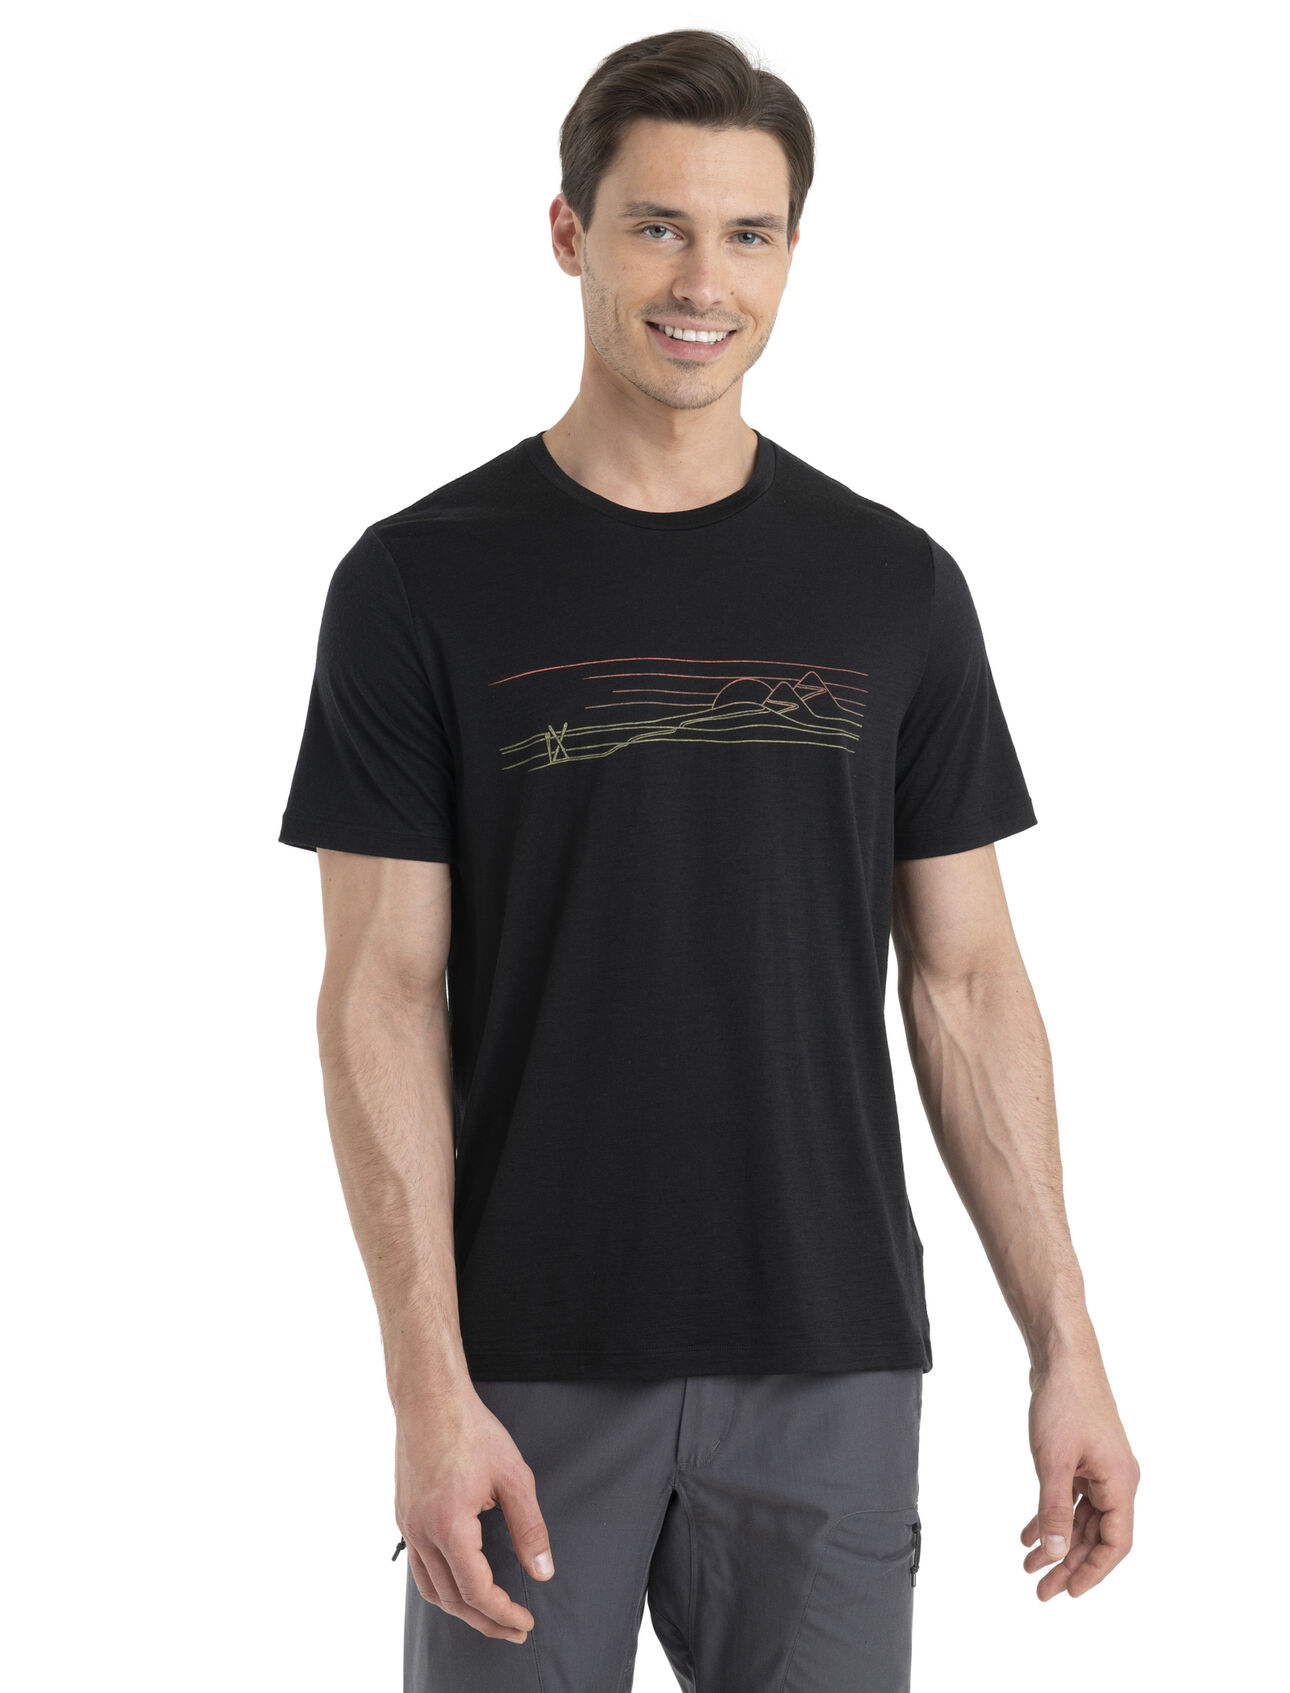 Mens Merino Tech Lite II Short Sleeve T-Shirt Ski Stripes Our versatile tech tee that provides comfort, breathability and natural odor-resistance for any adventure you can think of, the Tech Lite II Short Sleeve Tee Ski Stripes features 100% merino for all-natural performance. The tee’s original artwork by Damon Watters features a gradient illustration of a classic ski field.